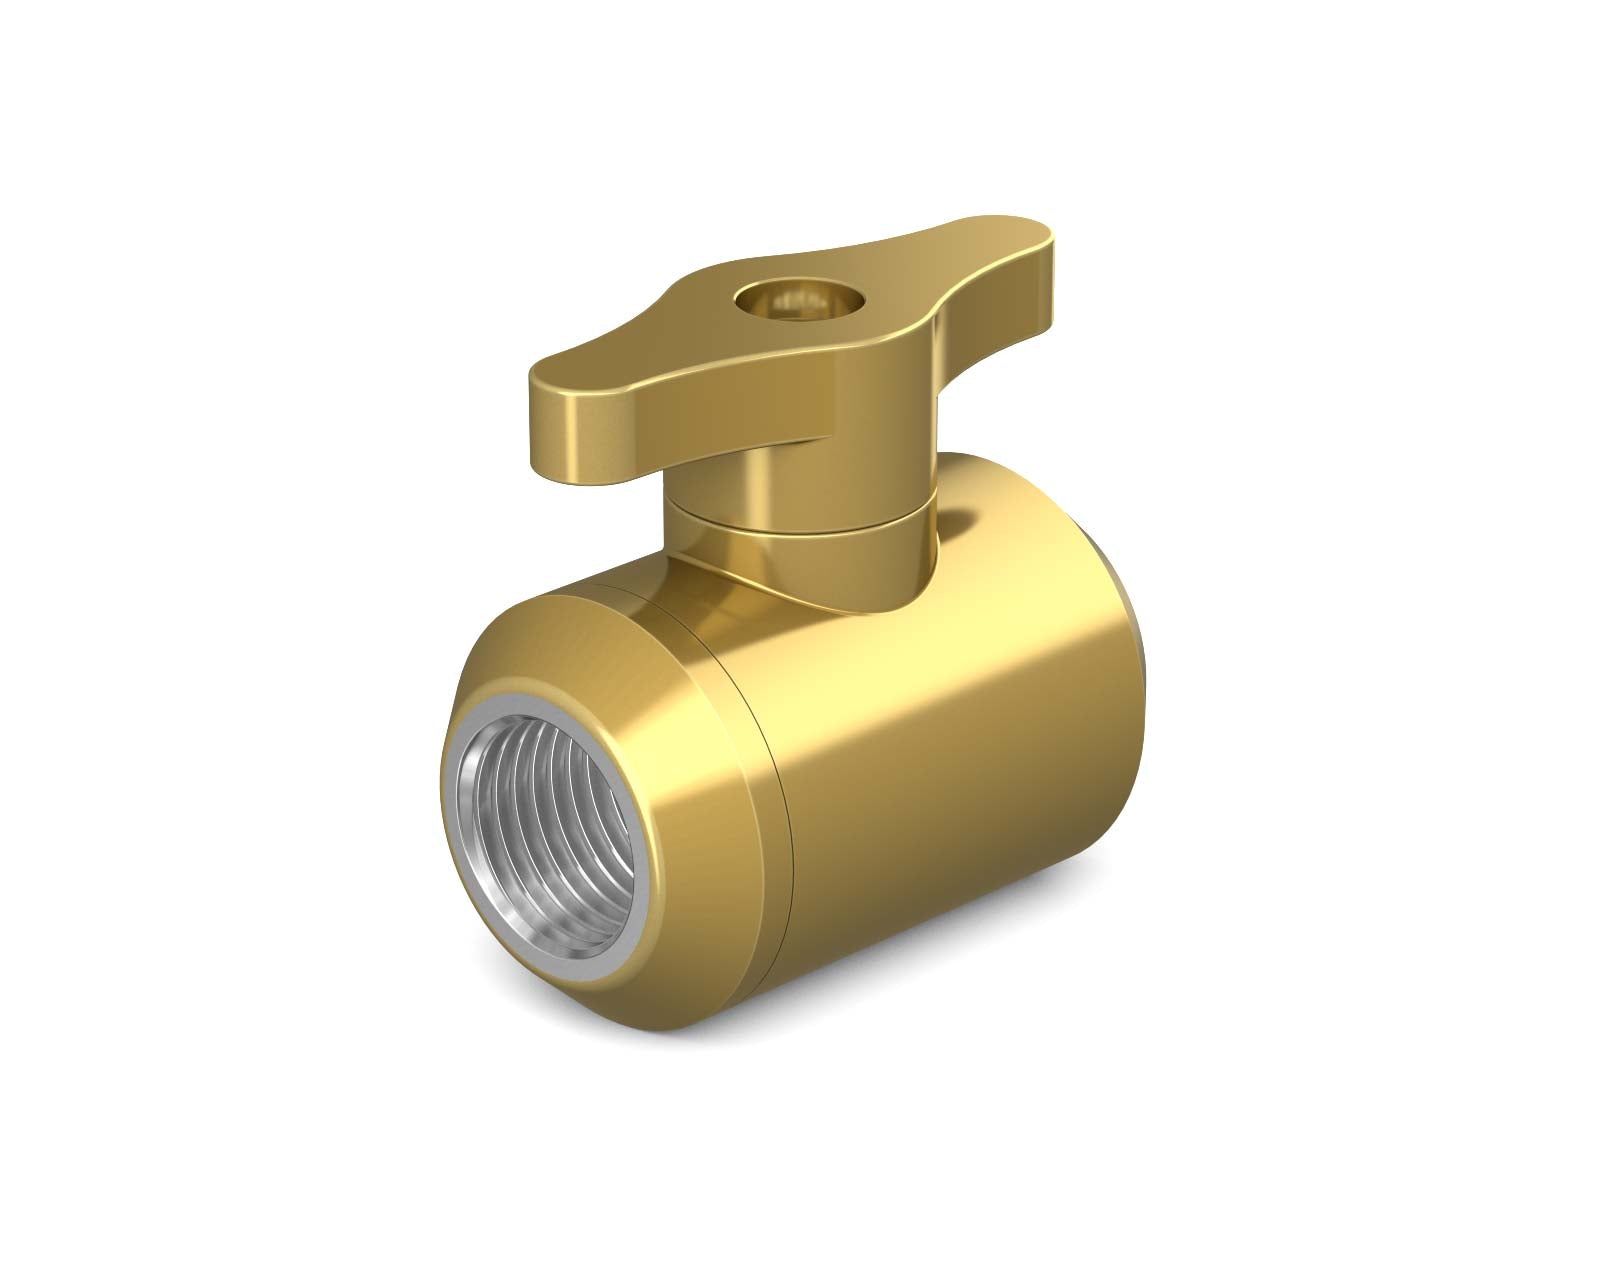 PrimoChill Female to Female G 1/4 Drain Ball Valve - PrimoChill - KEEPING IT COOL Candy Gold